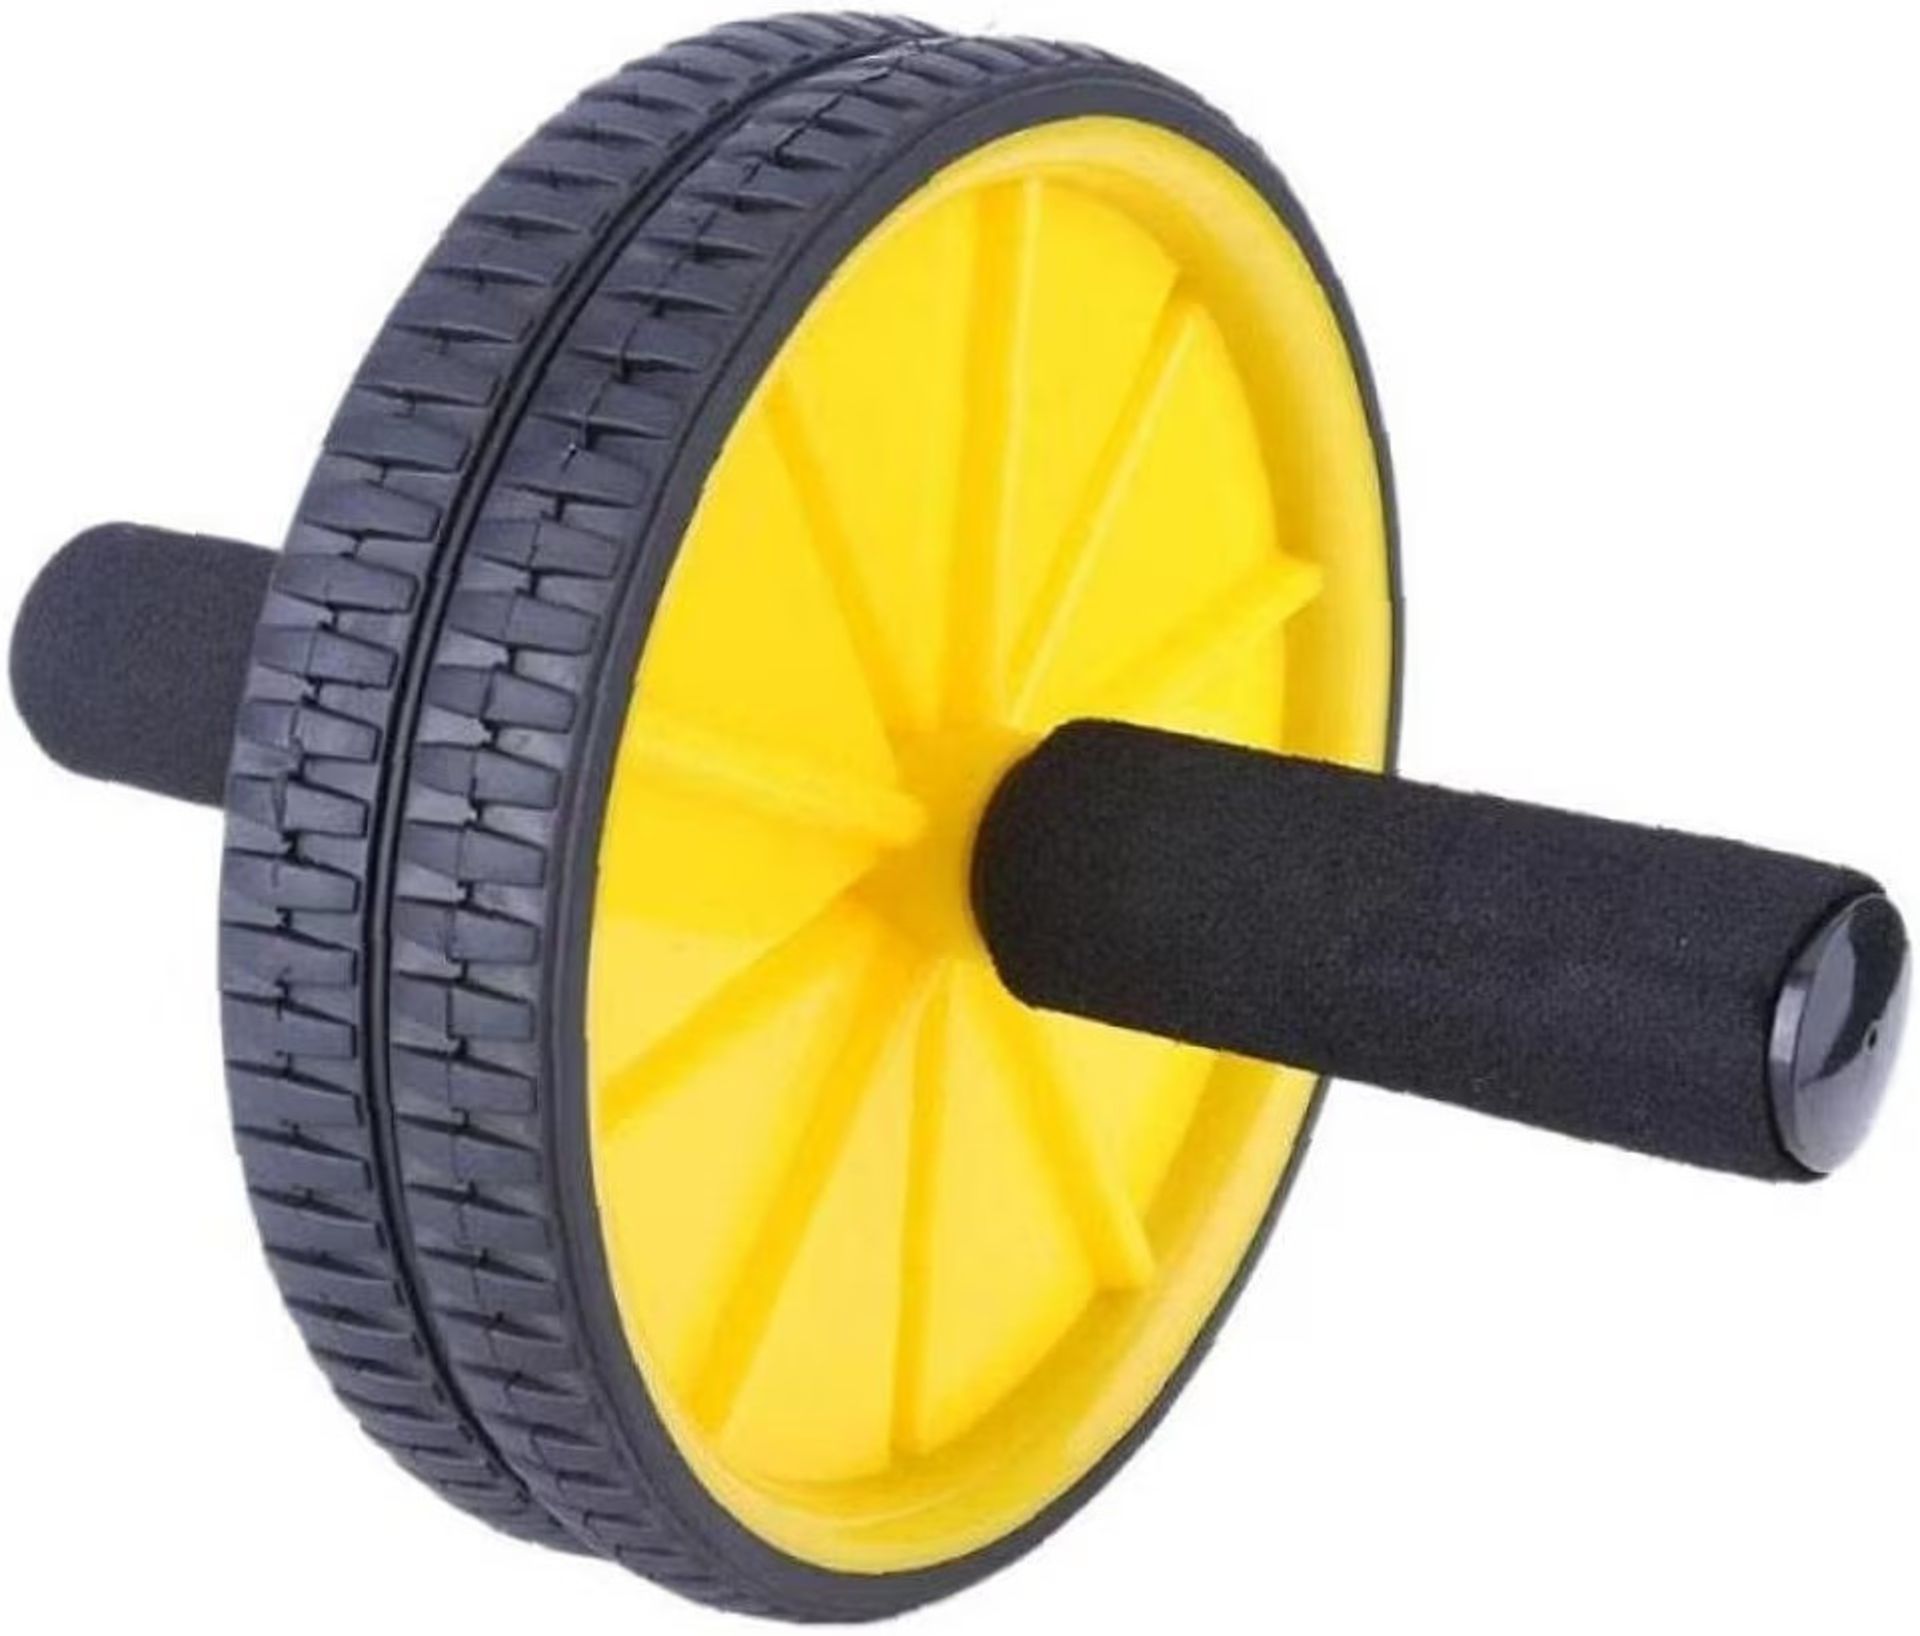 [NEW] Double-wheeled Updated Ab Abdominal Press Wheel Roller Gym Fitness Equipment Exe - Image 2 of 2